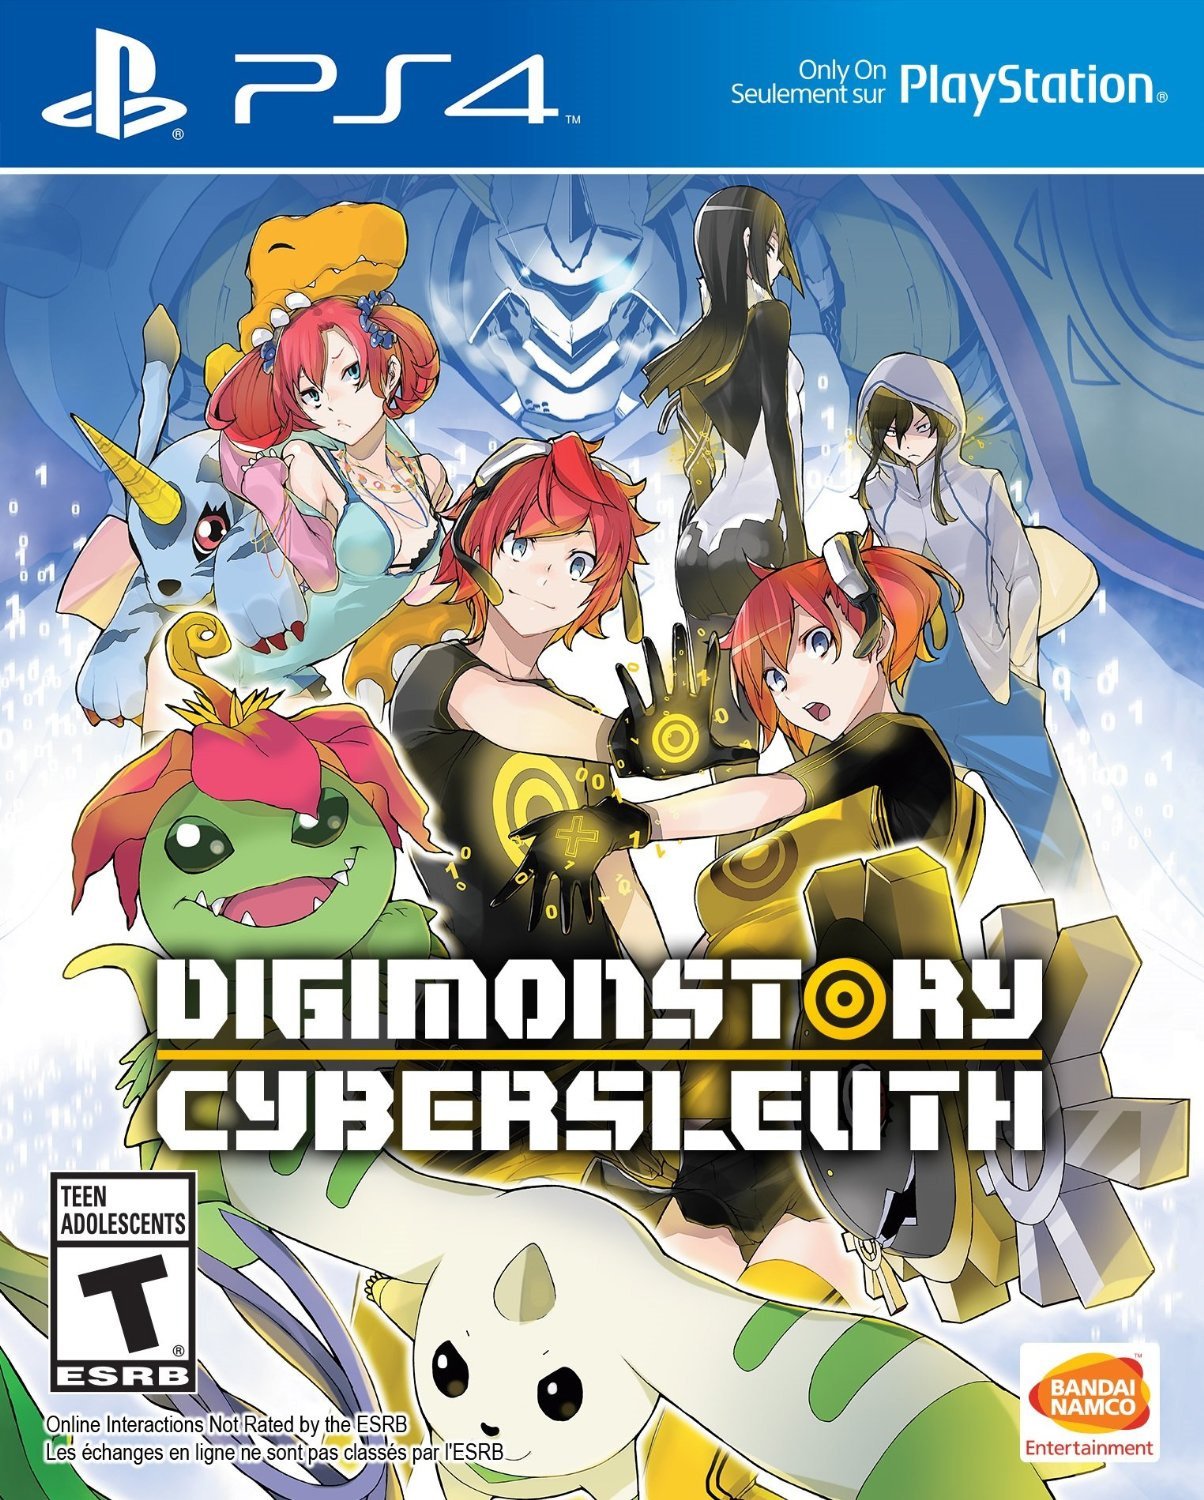 October 27, 2015 Patch - Digimon Masters Online Wiki - DMO Wiki